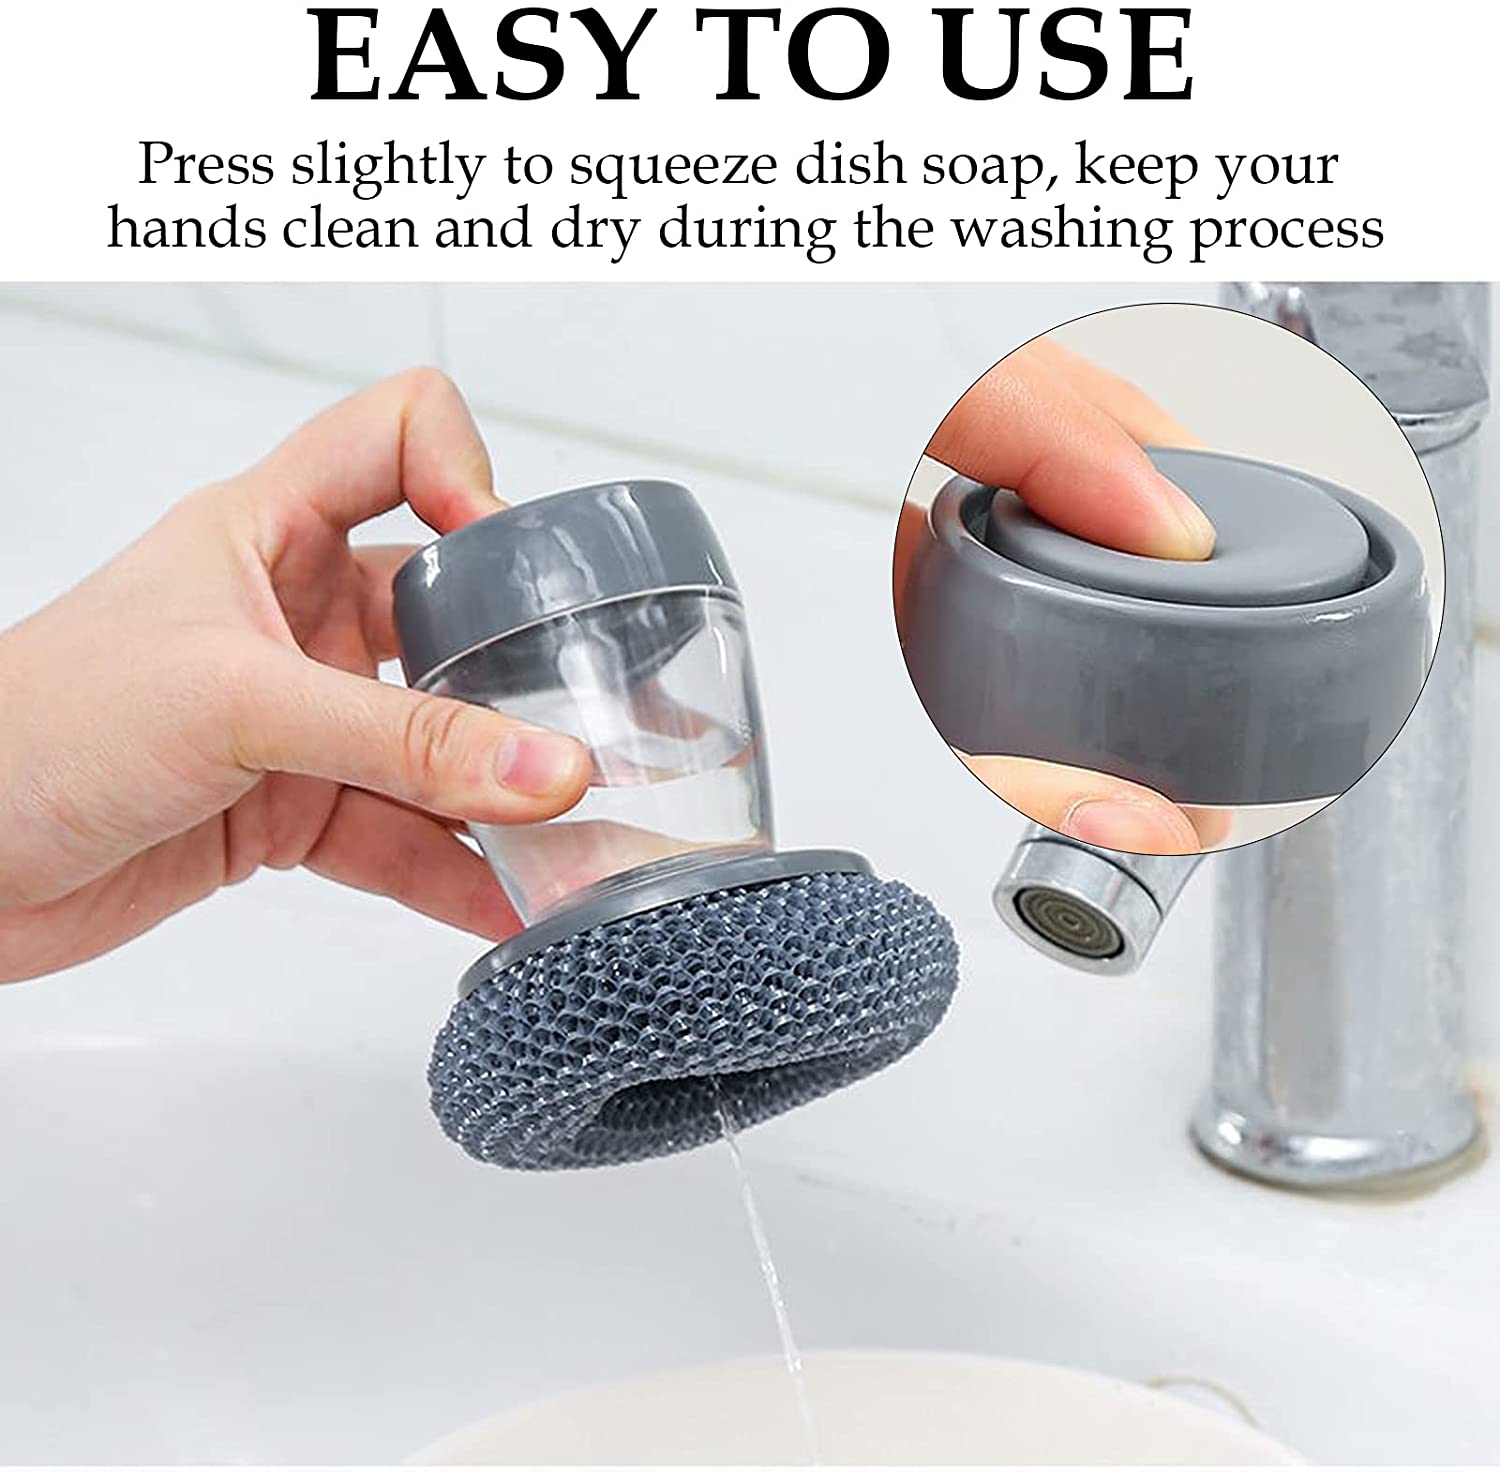 Kitchen Soap brush Dish Cleaning tools Dispensing Brush Wash Clean Tool Soap  Dispenser Brush Kitchen Cleaning